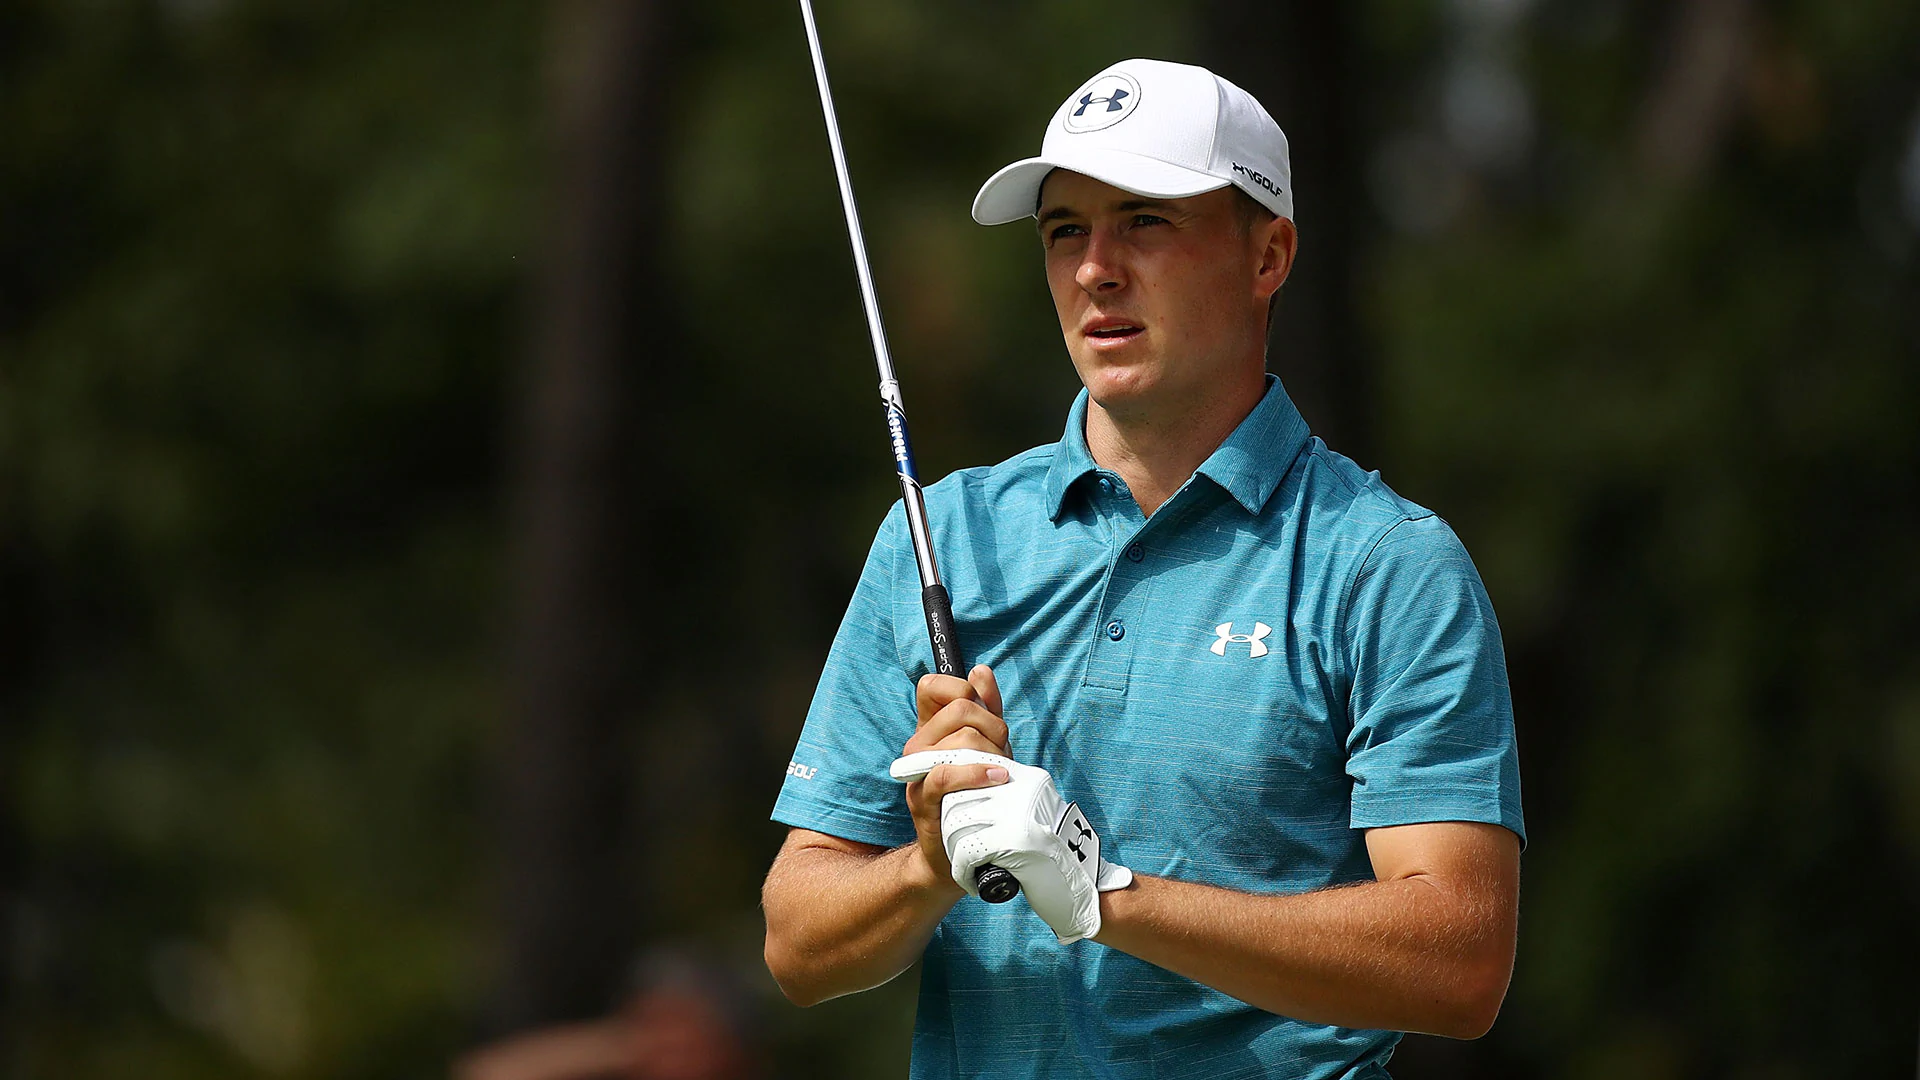 Spieth 'stole a few shots' in opening 65 at BMW